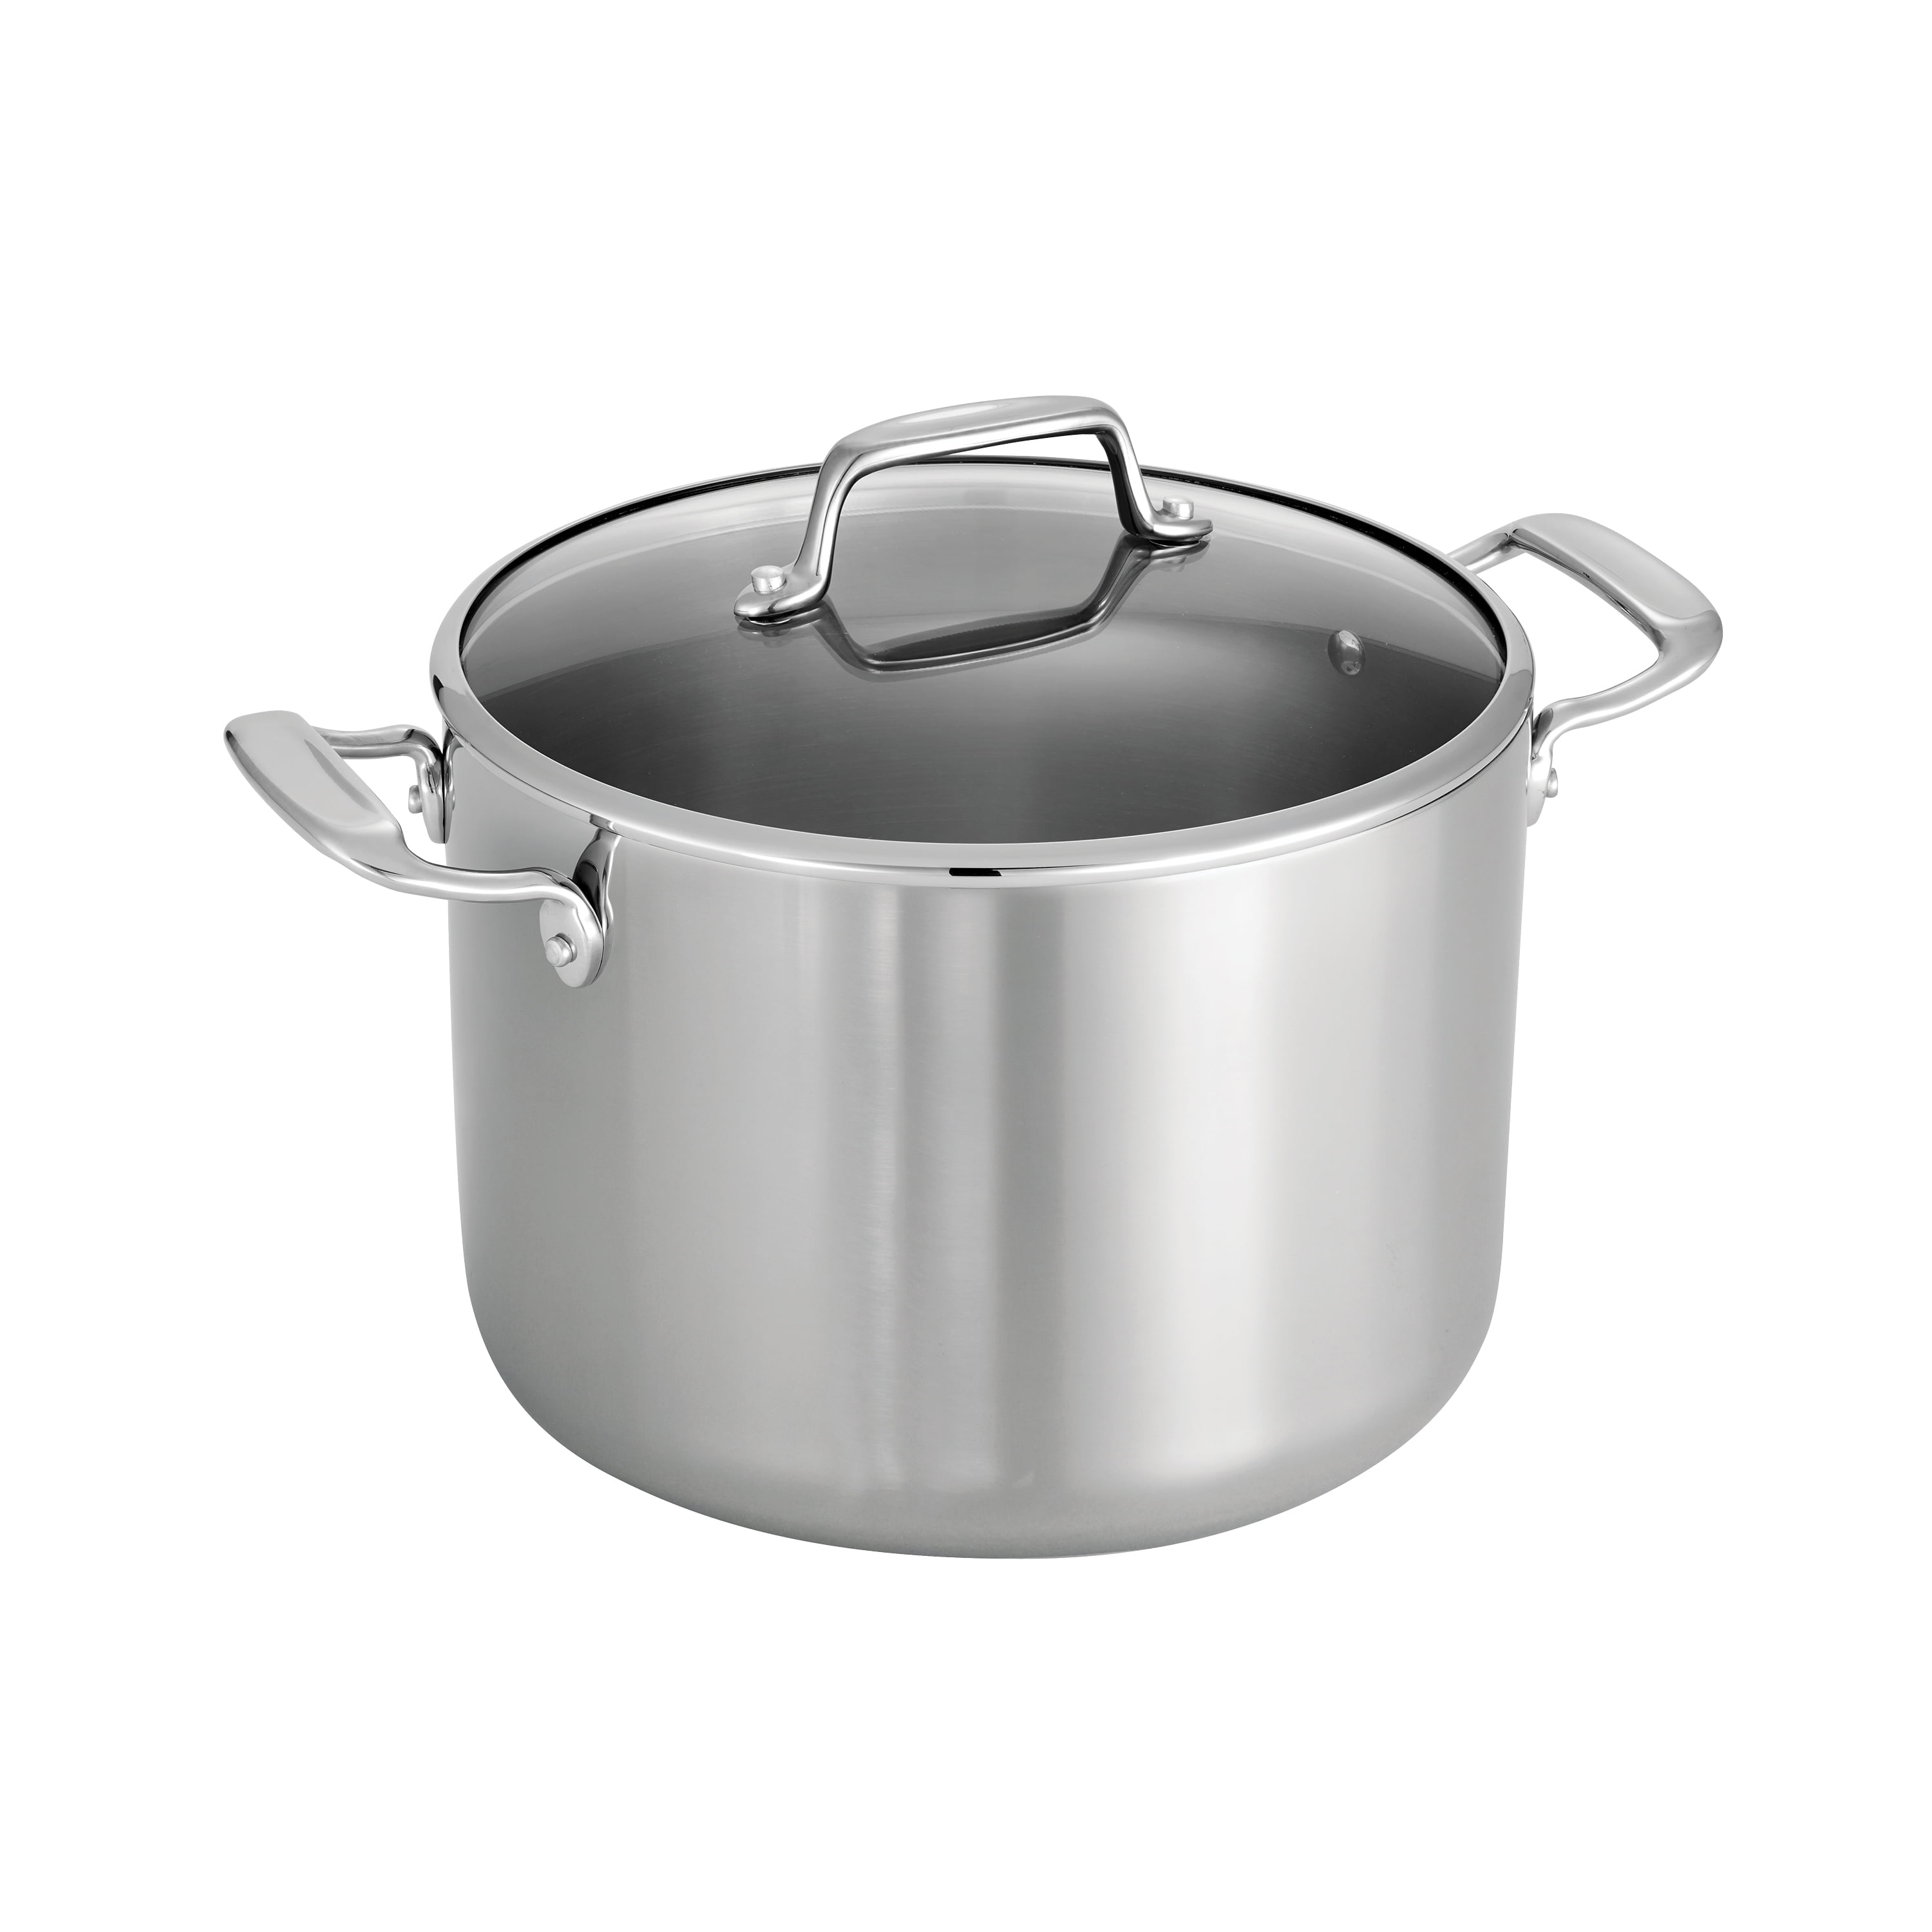 Tramontina Tri-Ply Clad 8 Qt Covered Stainless Steel StockPot